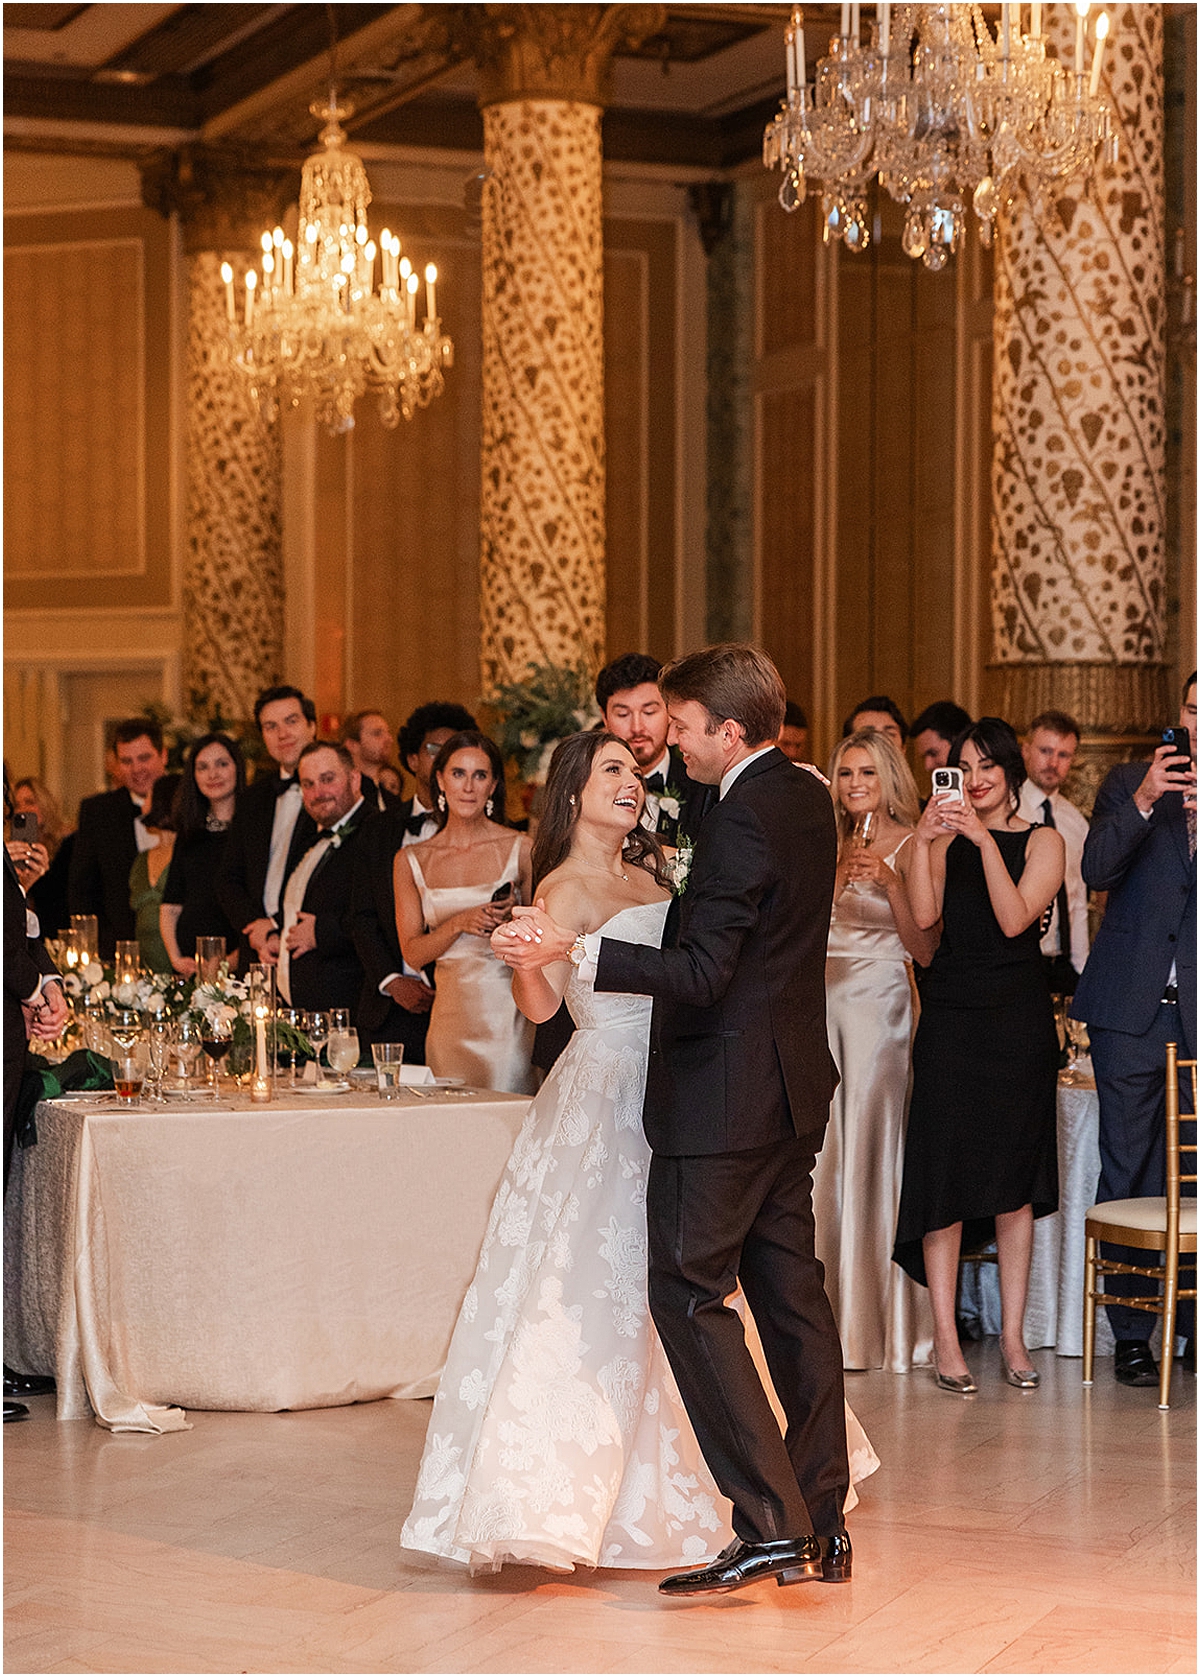 newlyweds first dance as husband and wife